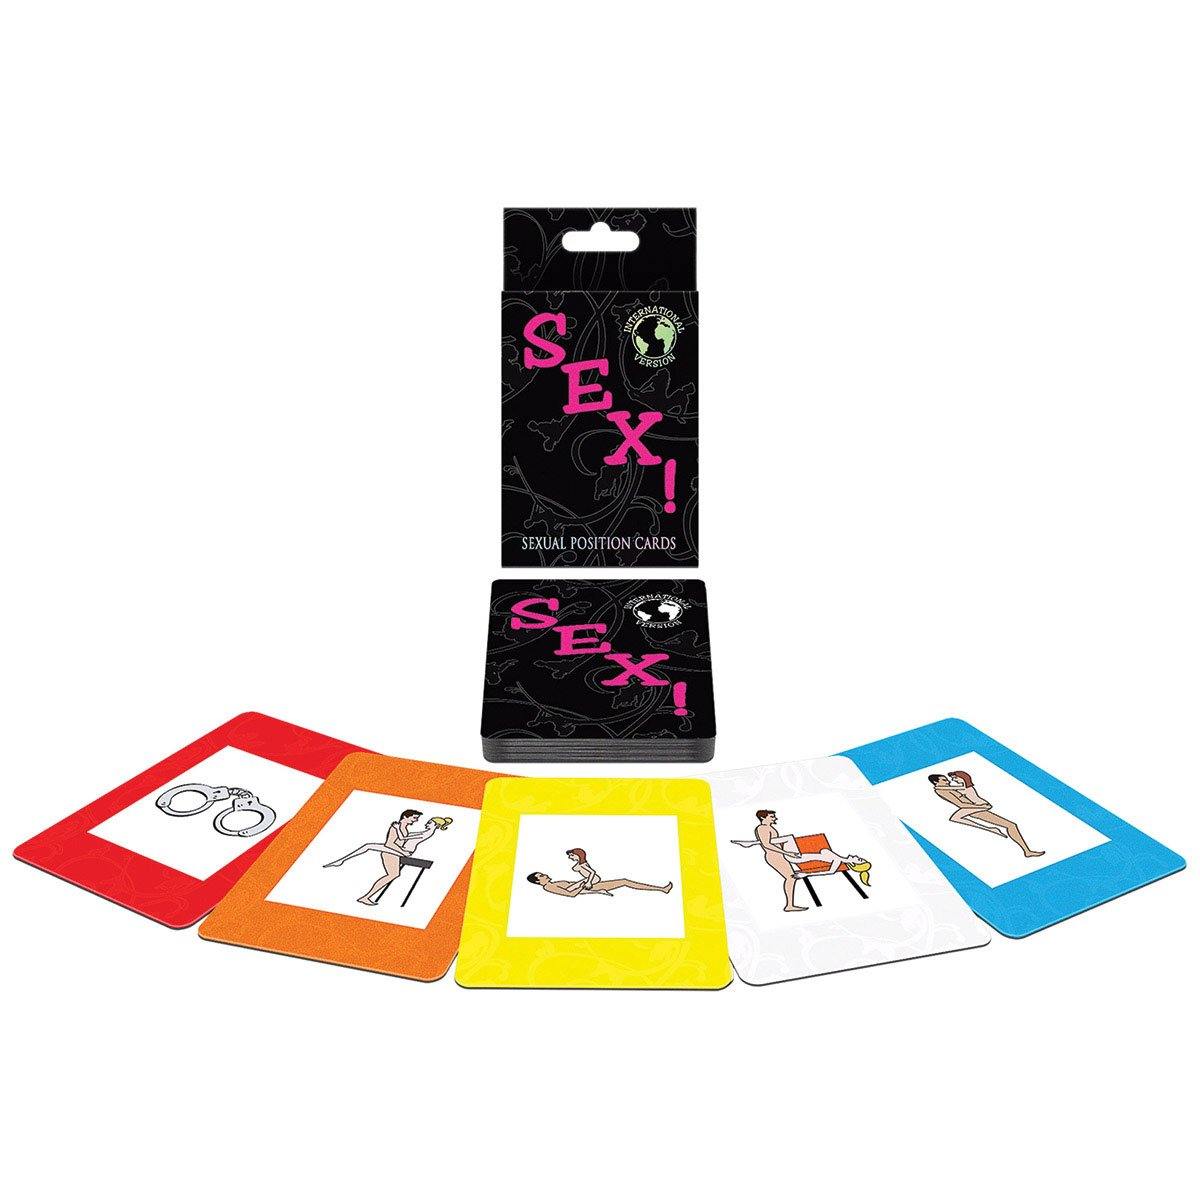 Sex! International Card Game - Buy At Luxury Toy X - Free 3-Day Shipping